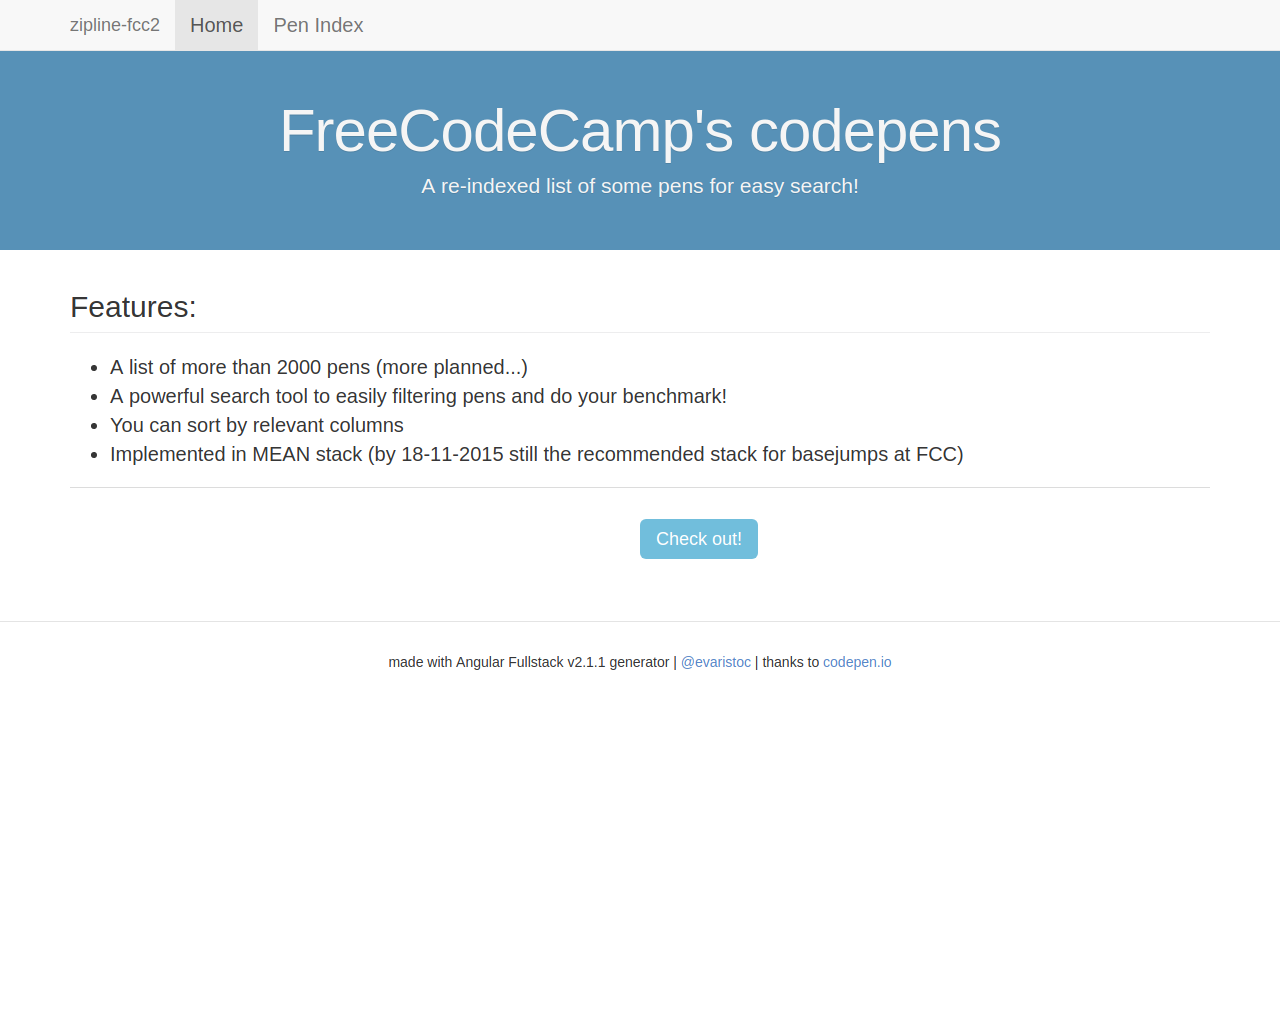 CodePen freeCodeCamp project lists